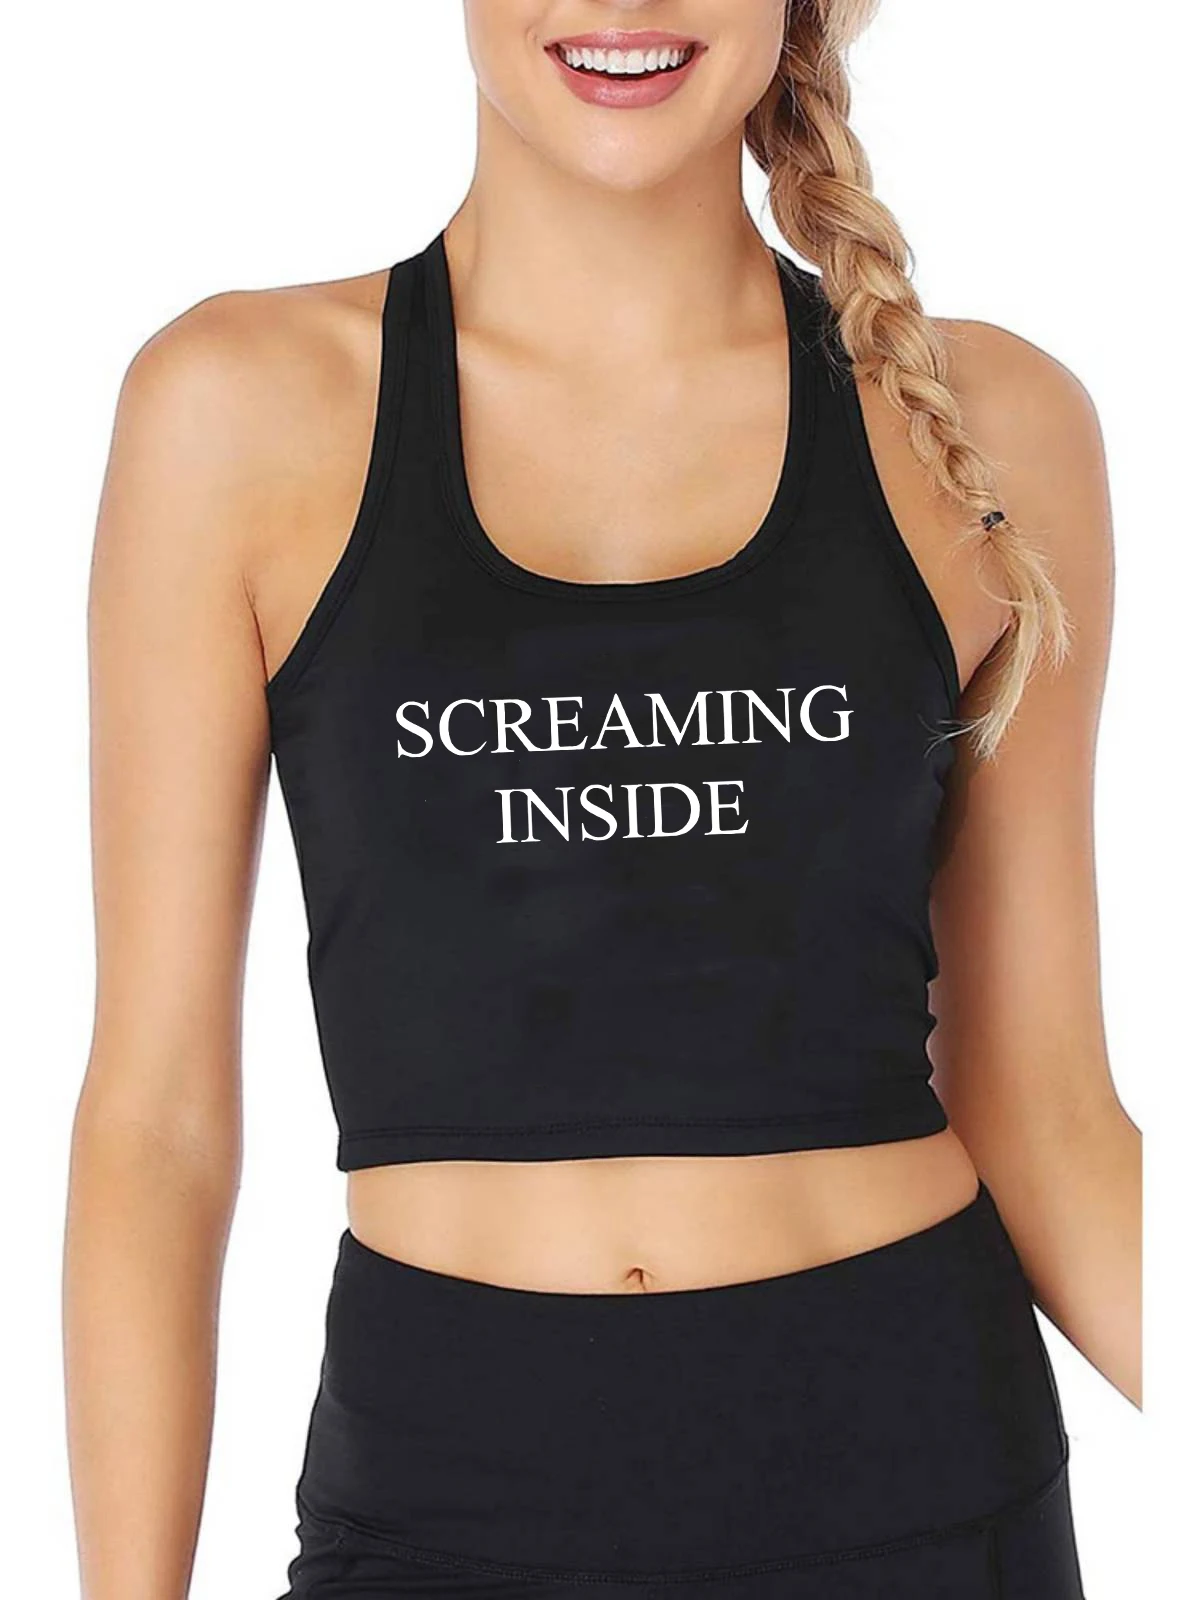 

Screaming Inside text design naughty sexy crop top women's funny flirtation tank tops customizable fashion creative camisole